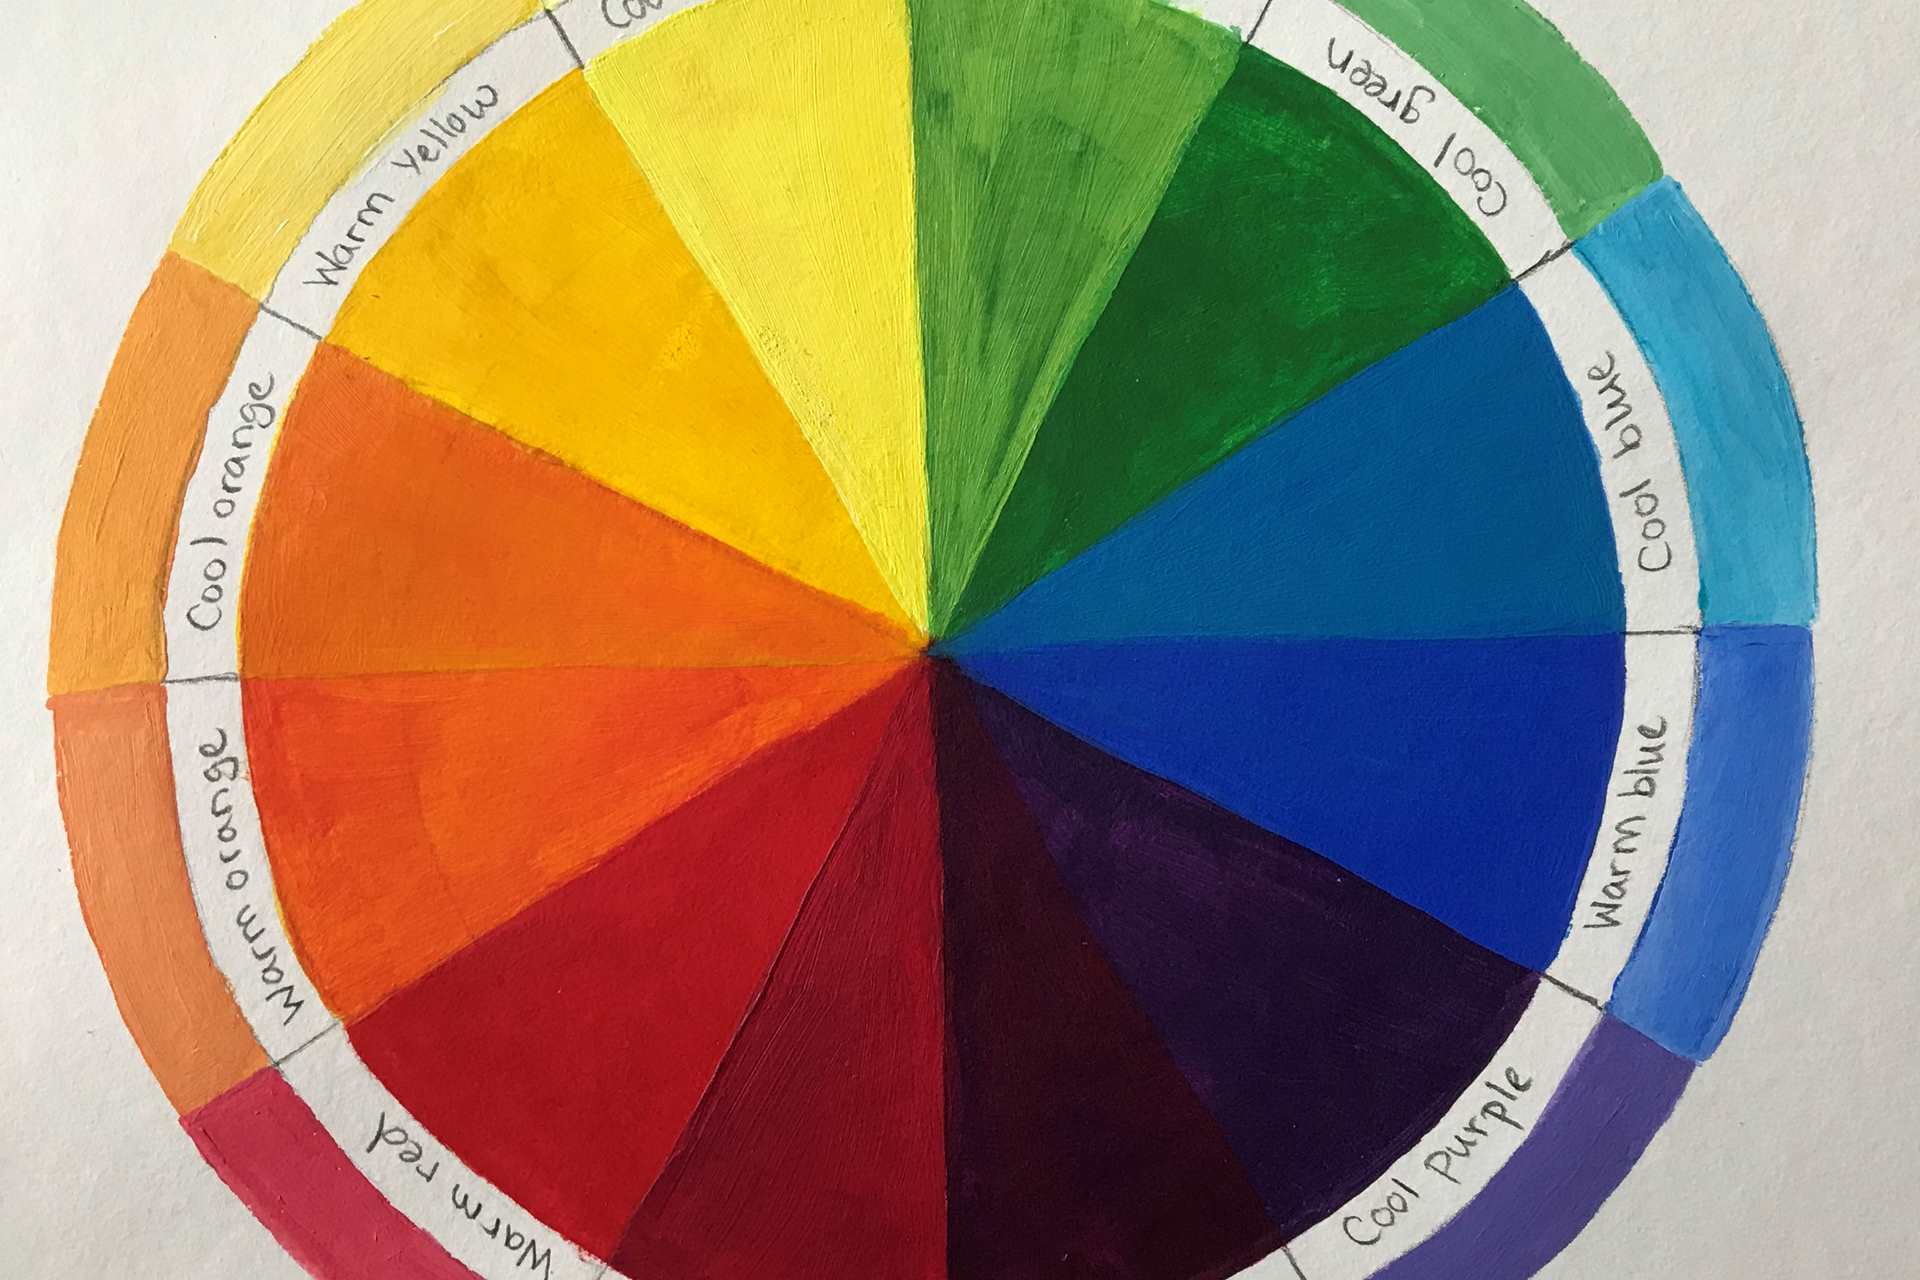 colour wheel of cool warm orange yellow green blue purple red segments outer and outer ring